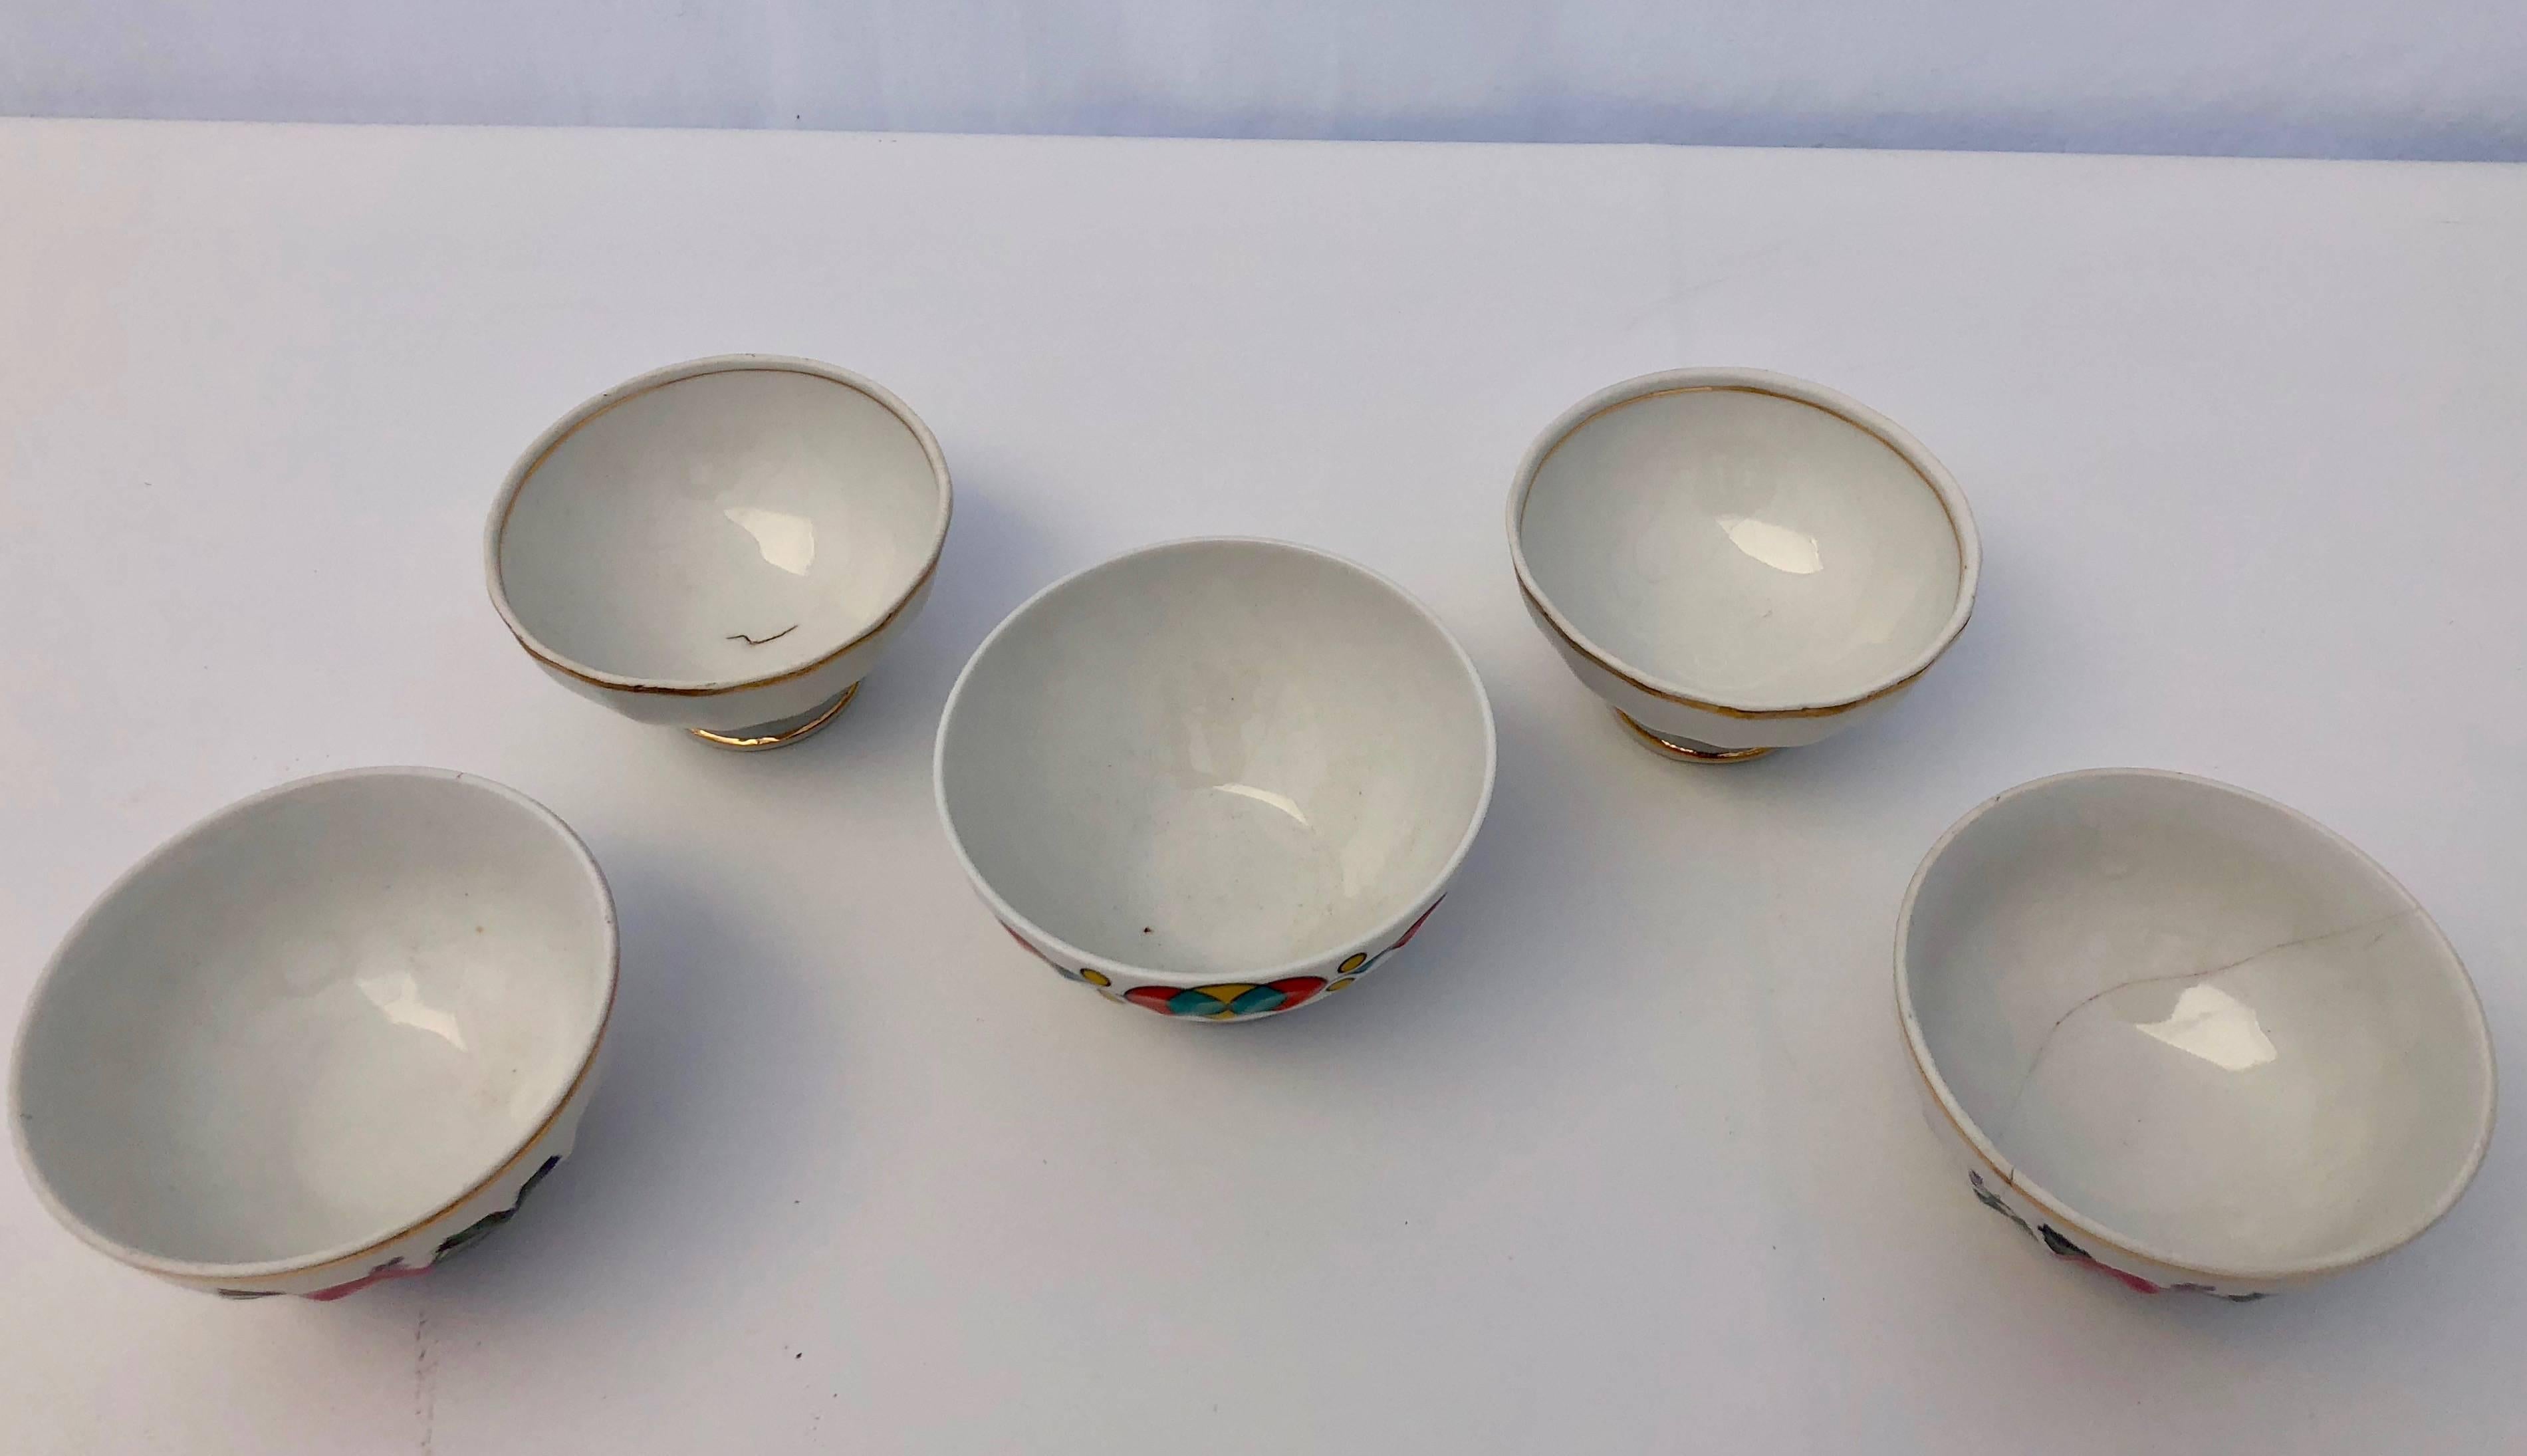 These small antique French bowls are not often found. There are five in the lot and all have a white background. A set of two have gold trim while another set of two are painted with a floral design and have gold trim at the top. A single bowl has a